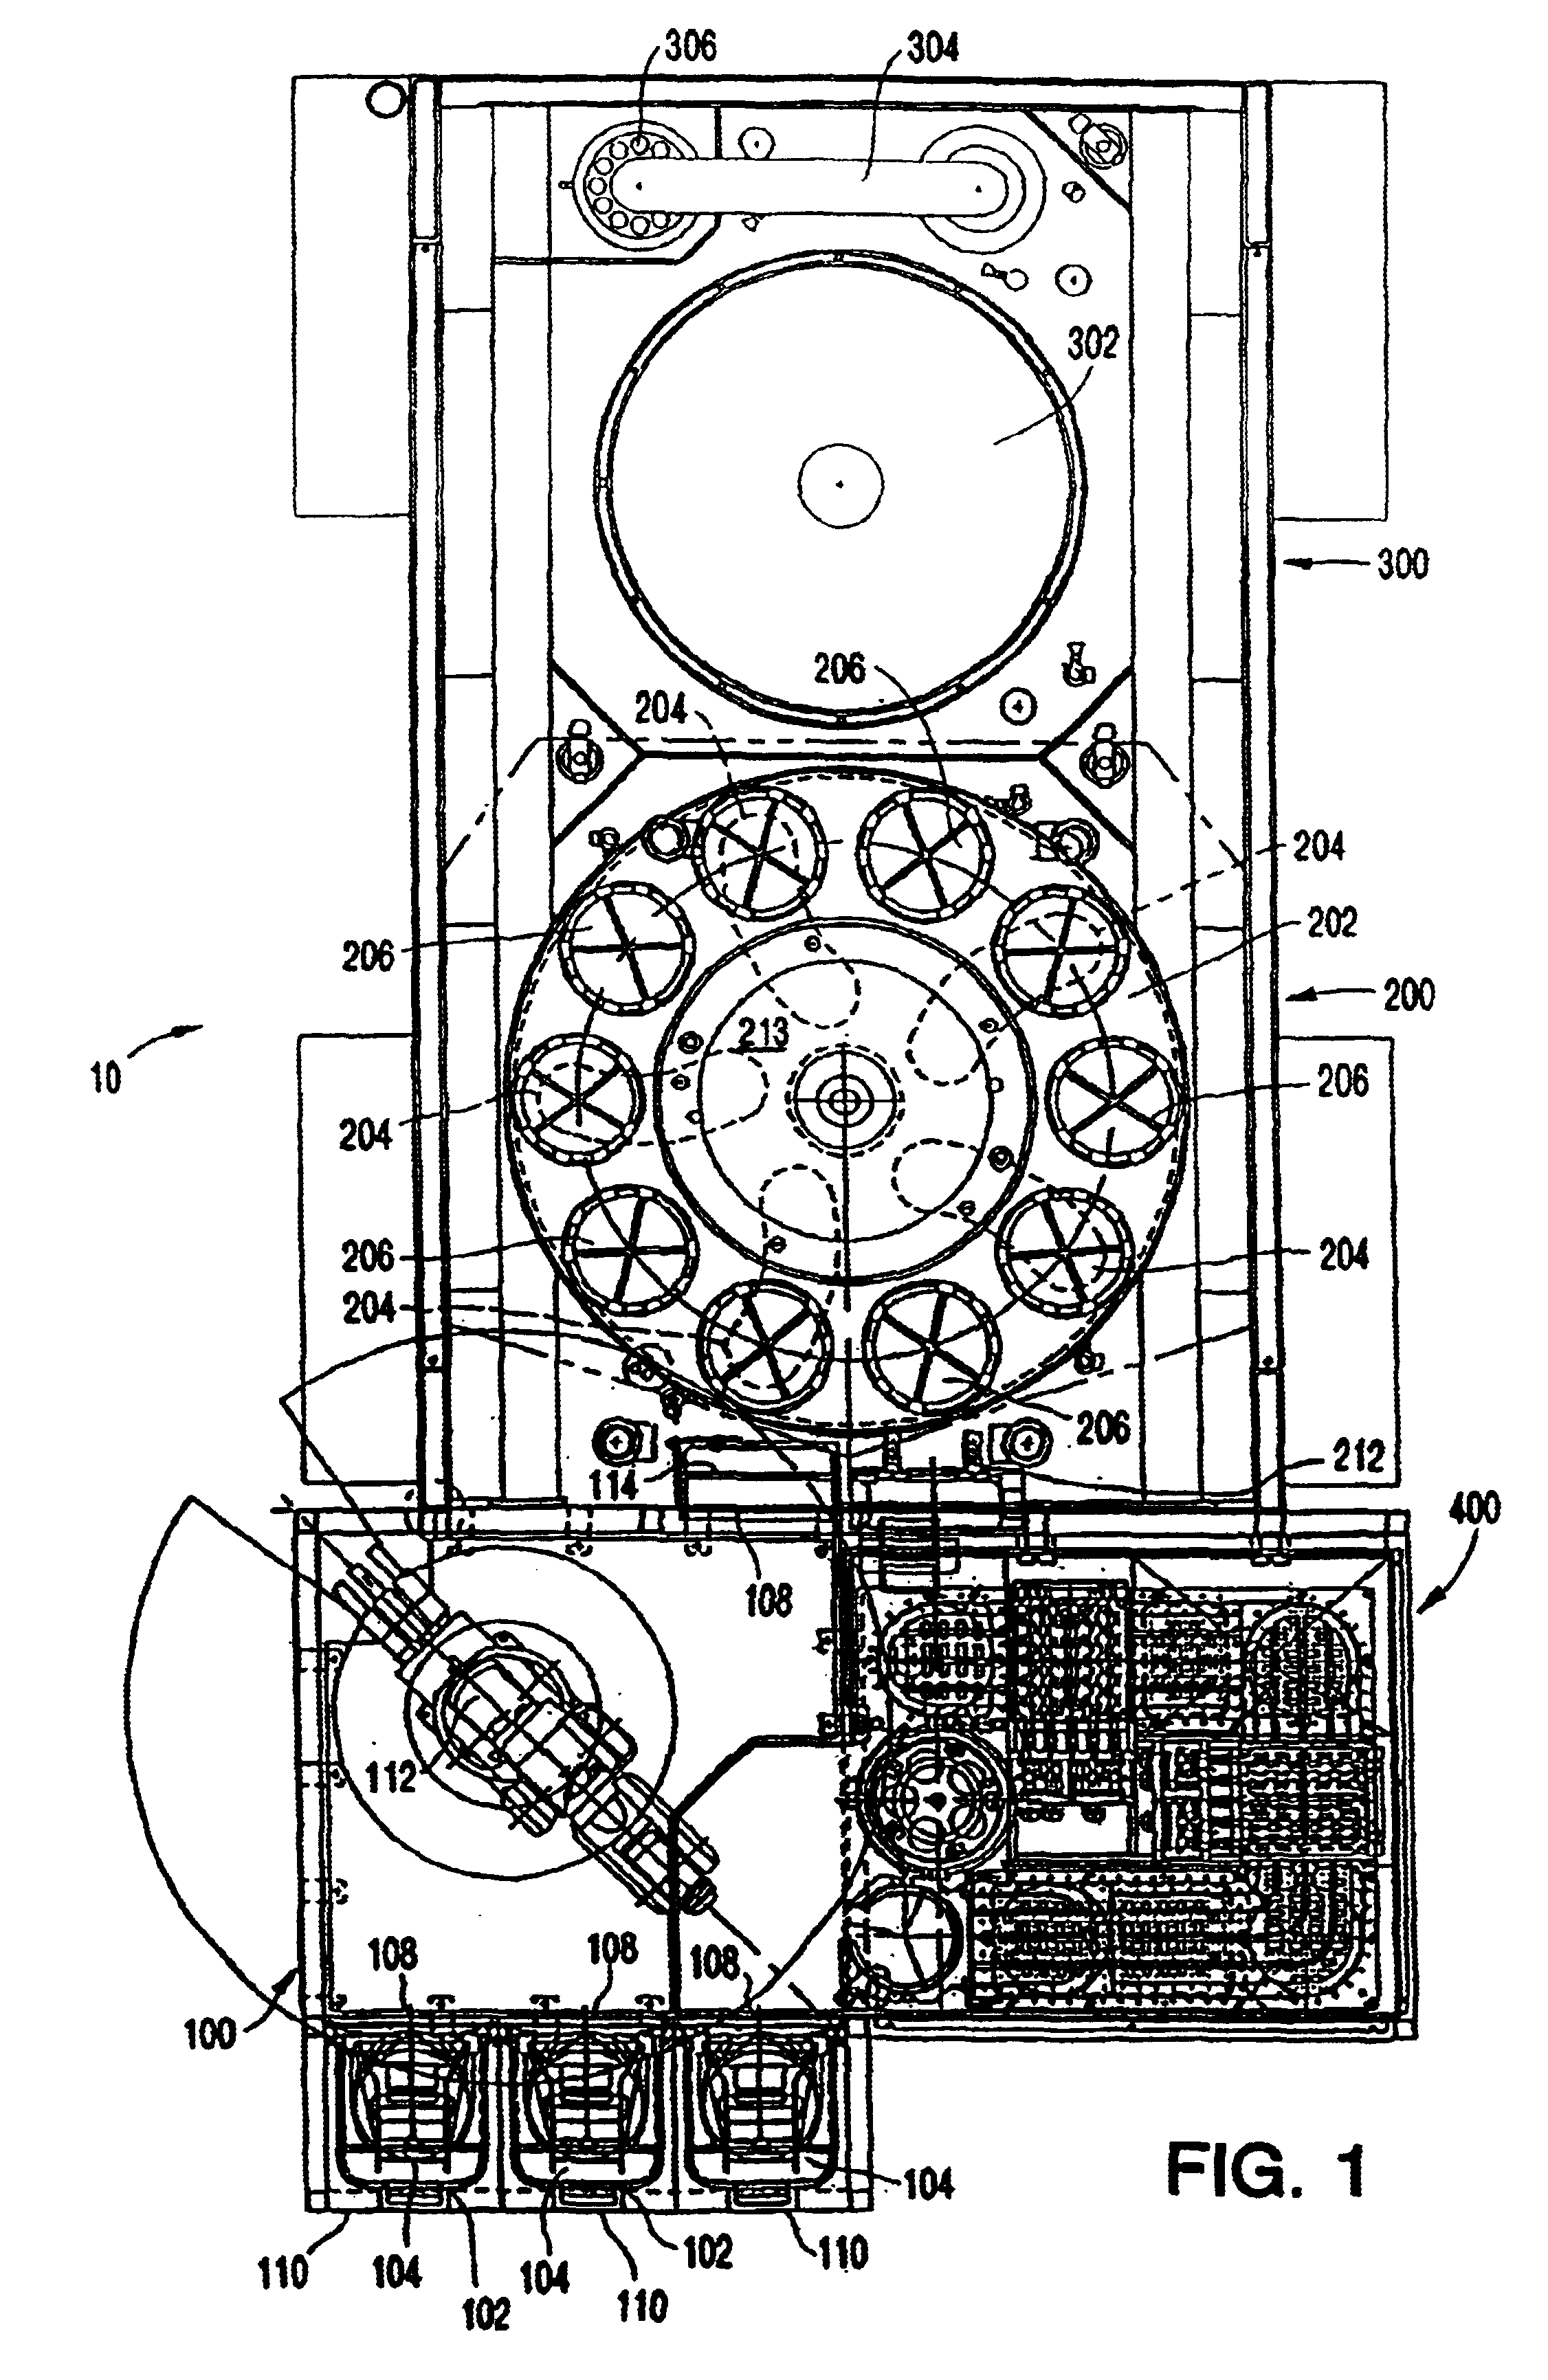 Robotic method of transferring workpieces to and from workstations